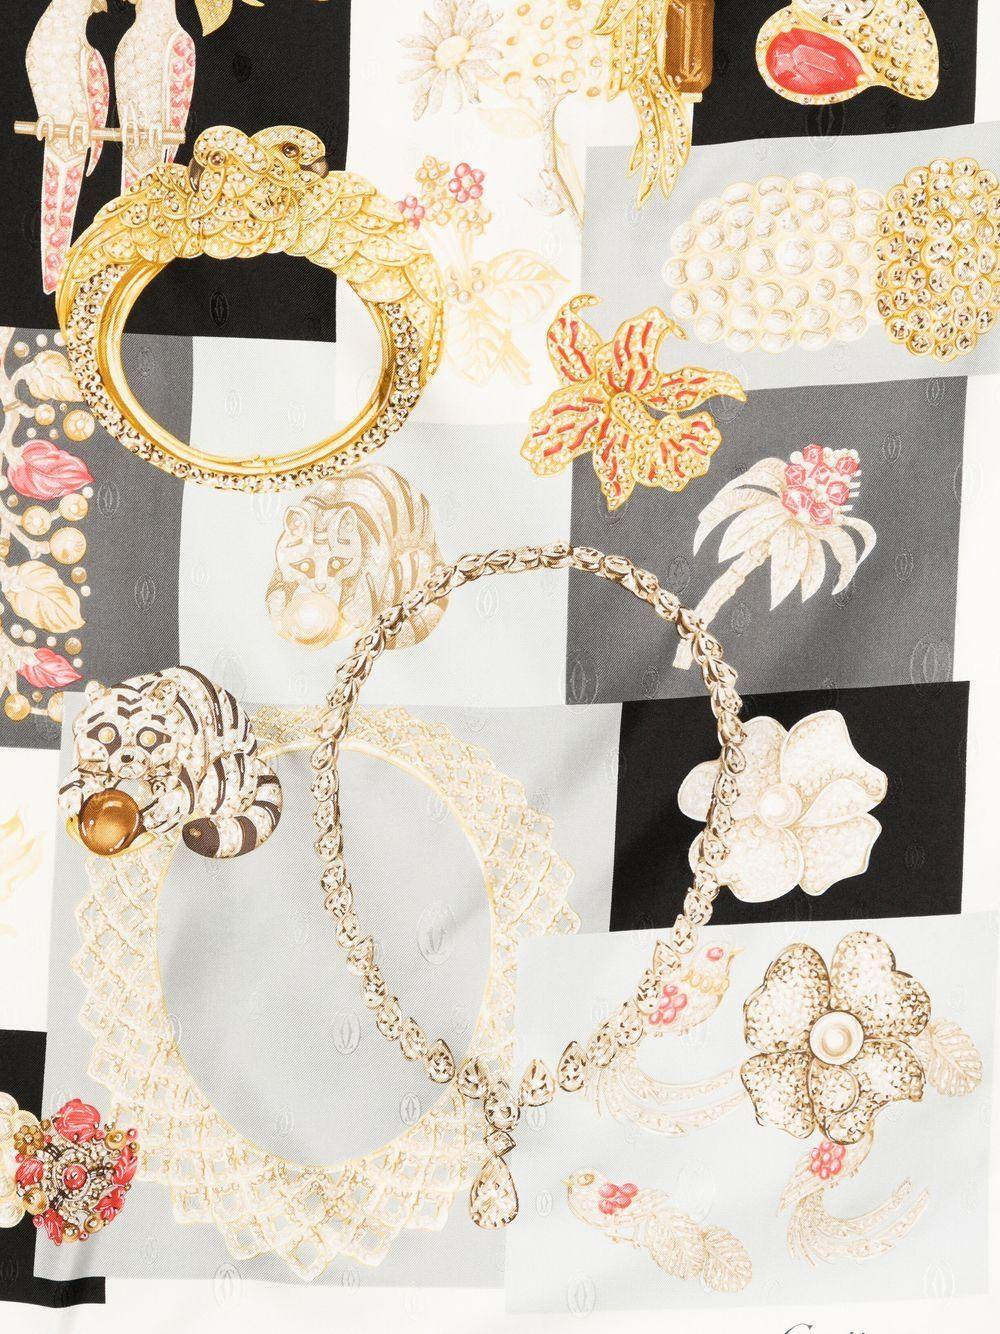 Cartier silk scarf adorned in various precious flora and fauna motives like bejewelled birds, wildcats, and more. Wear this accessory around your neck or handbag handles. Frame it on your wall for an alternative way to style it.